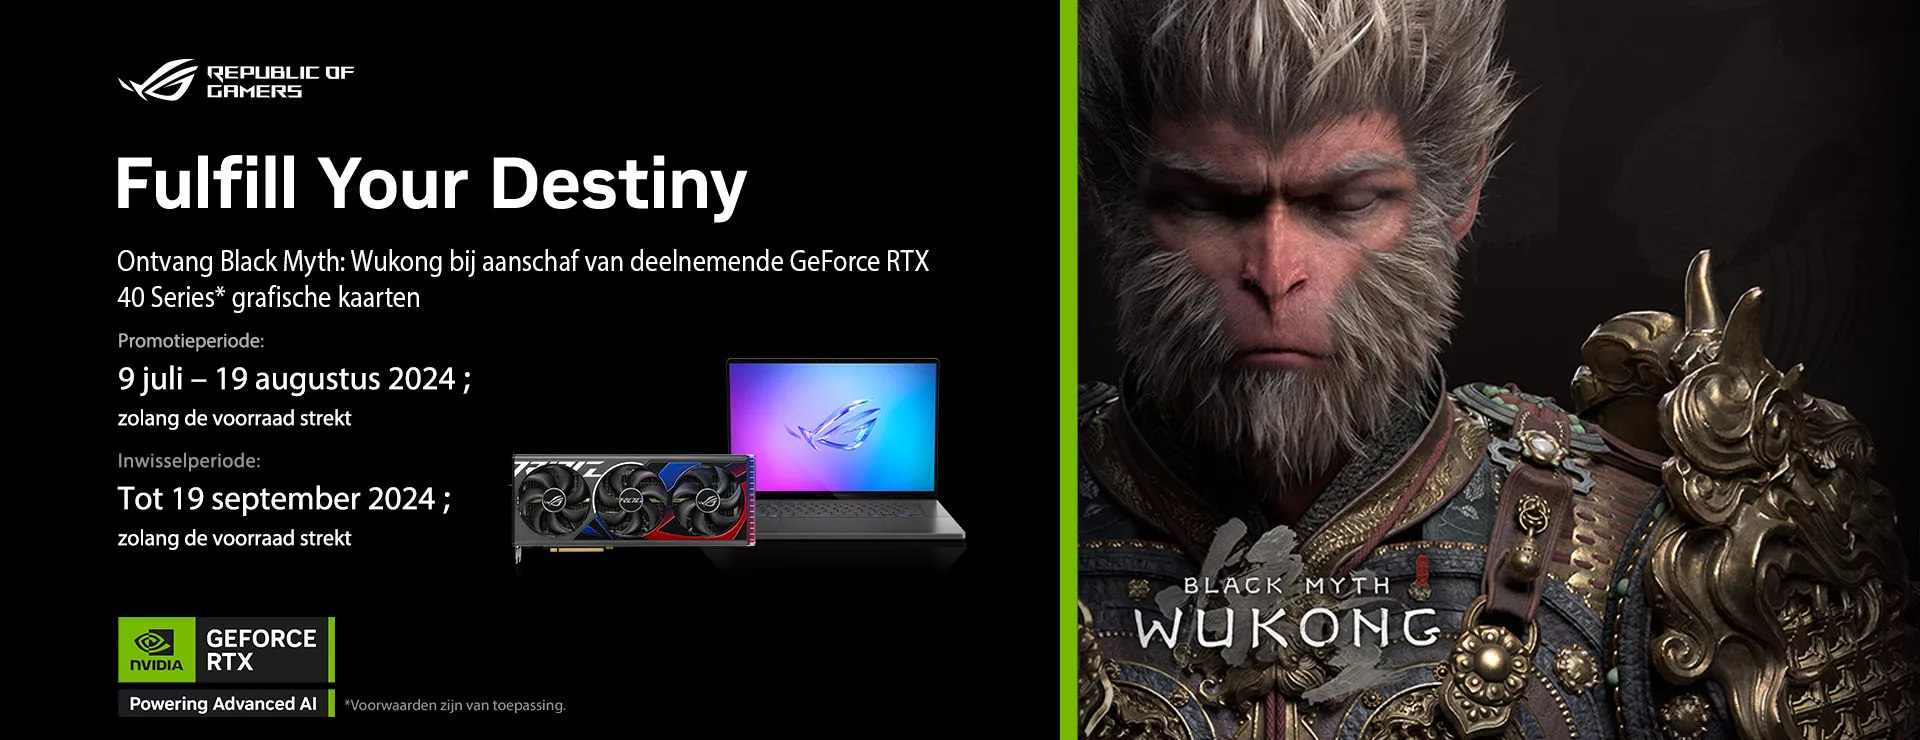 Nvidia GeForce RTX 40 Series with Black Myth: Wukong game offer, featuring gaming laptop and graphics card images, with offer dates from July to September 2024.